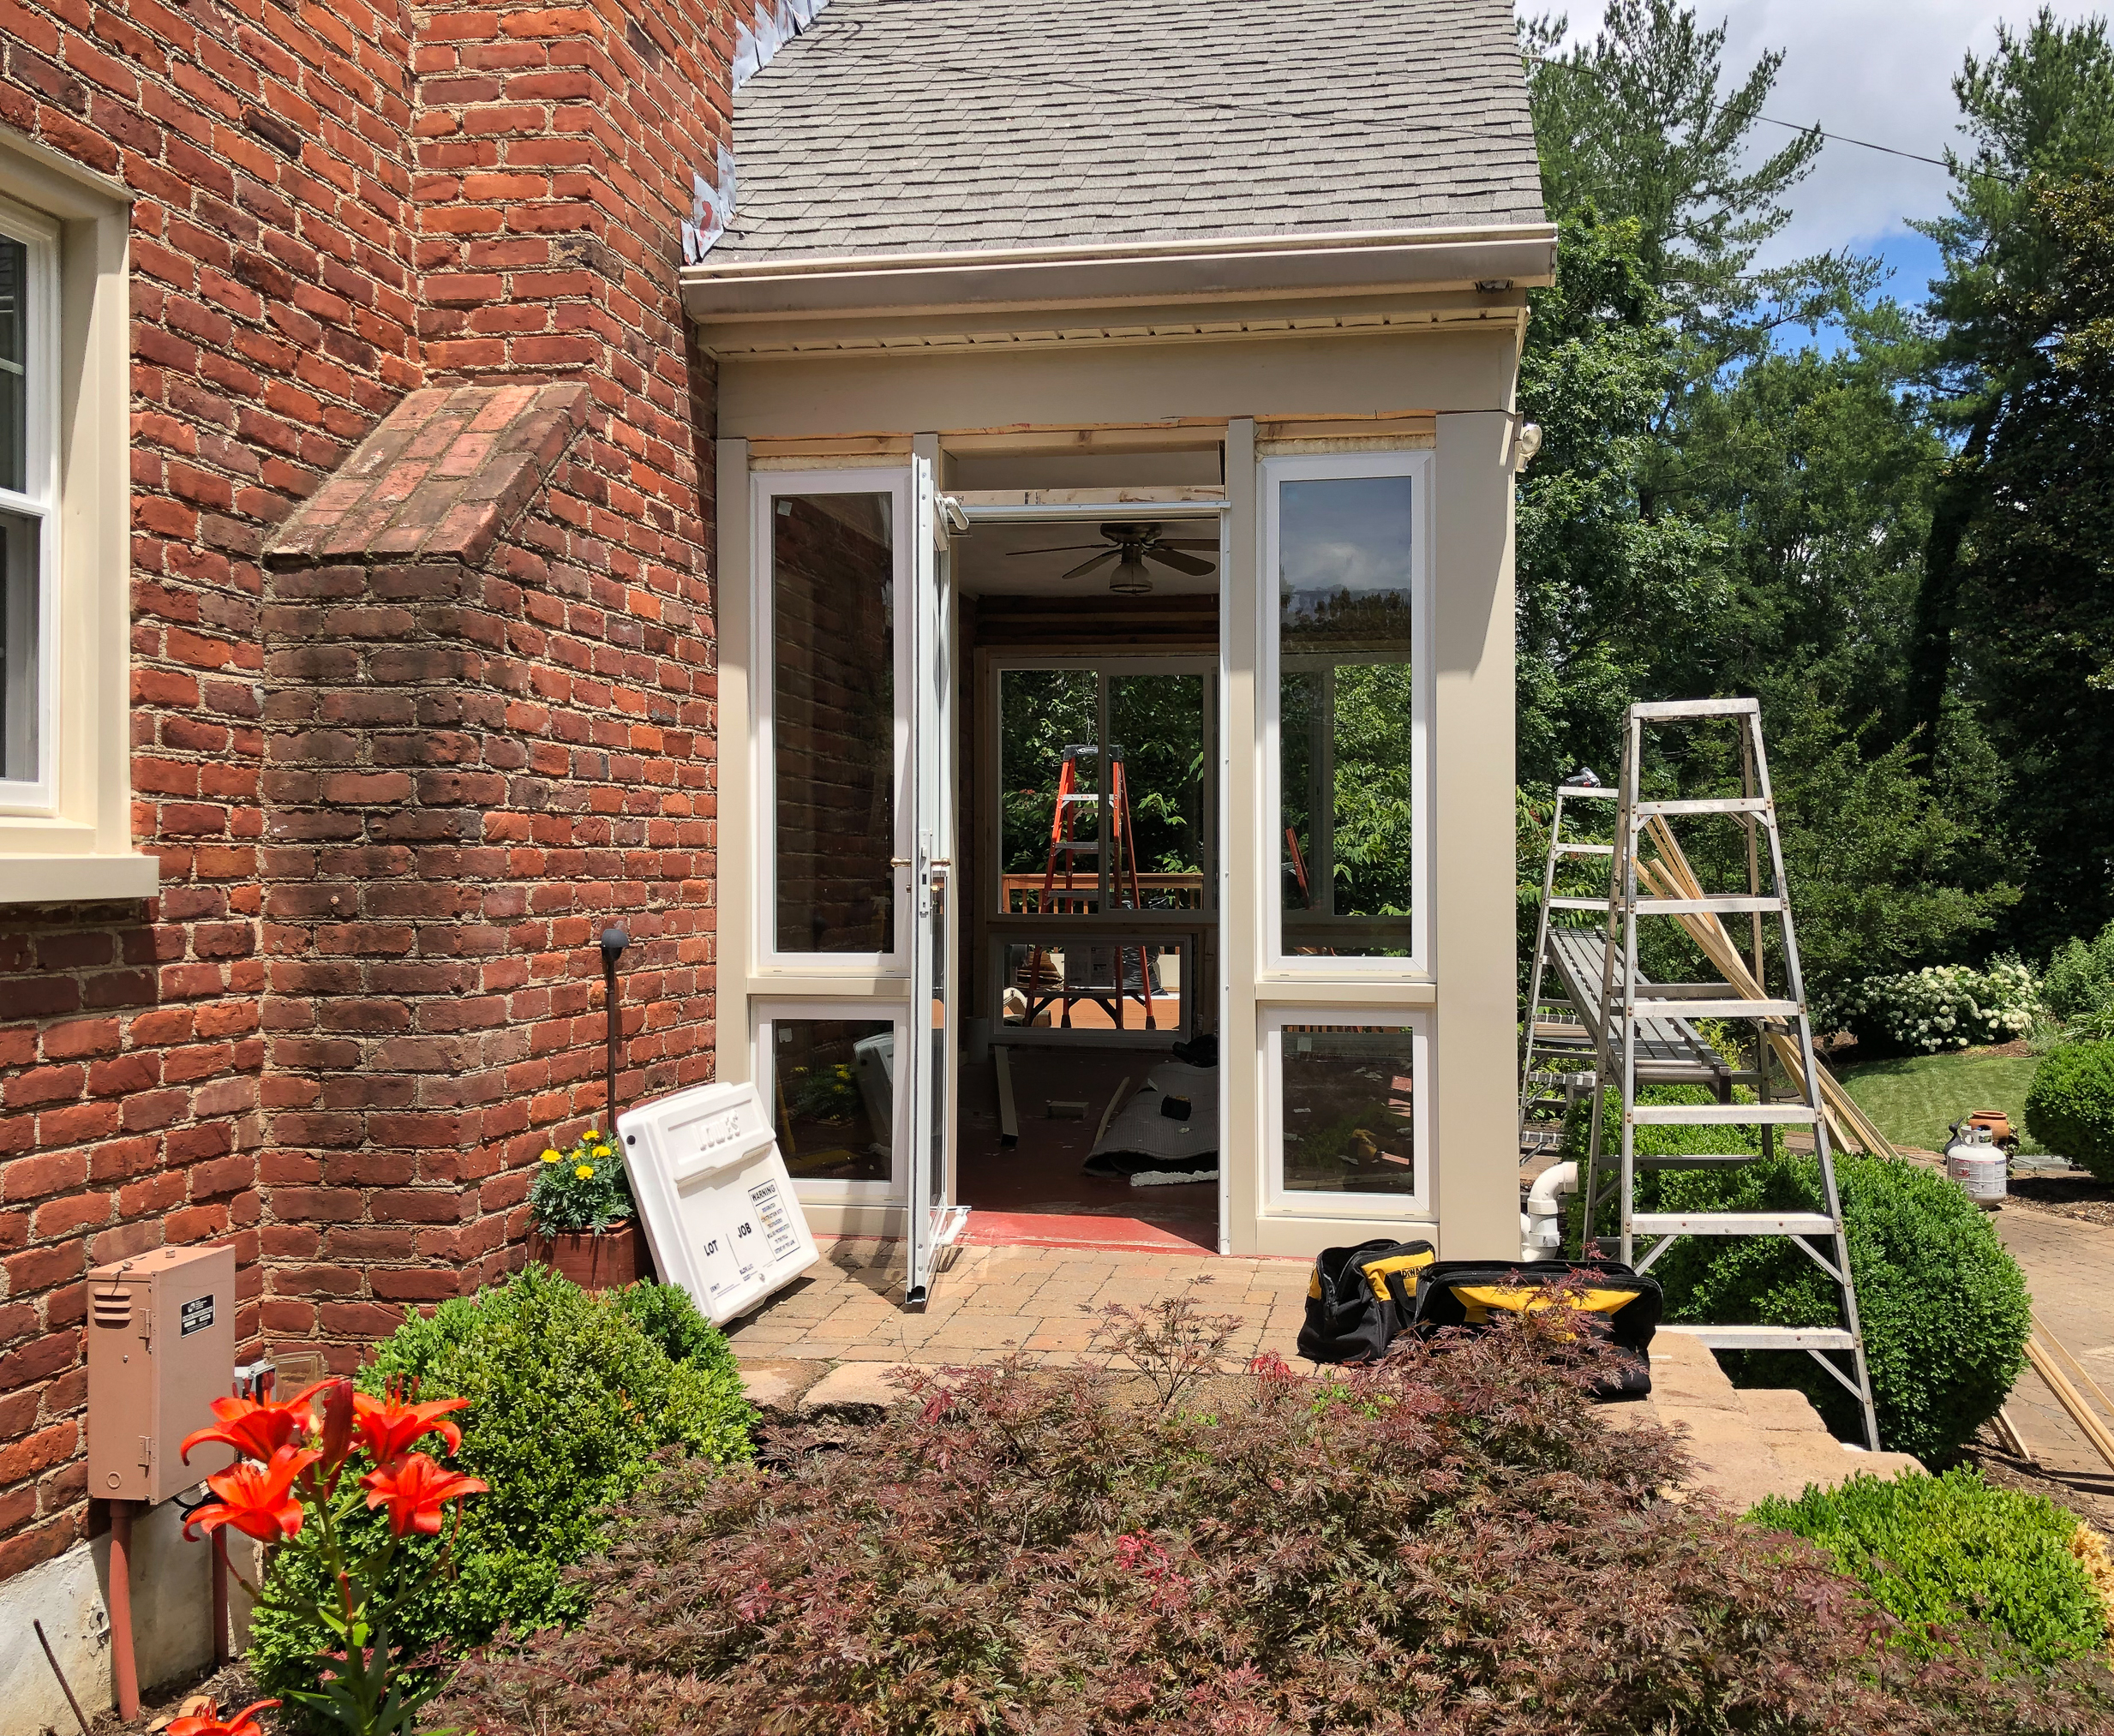 Converting a screened porch to a sunroom. Progress photo of the project.